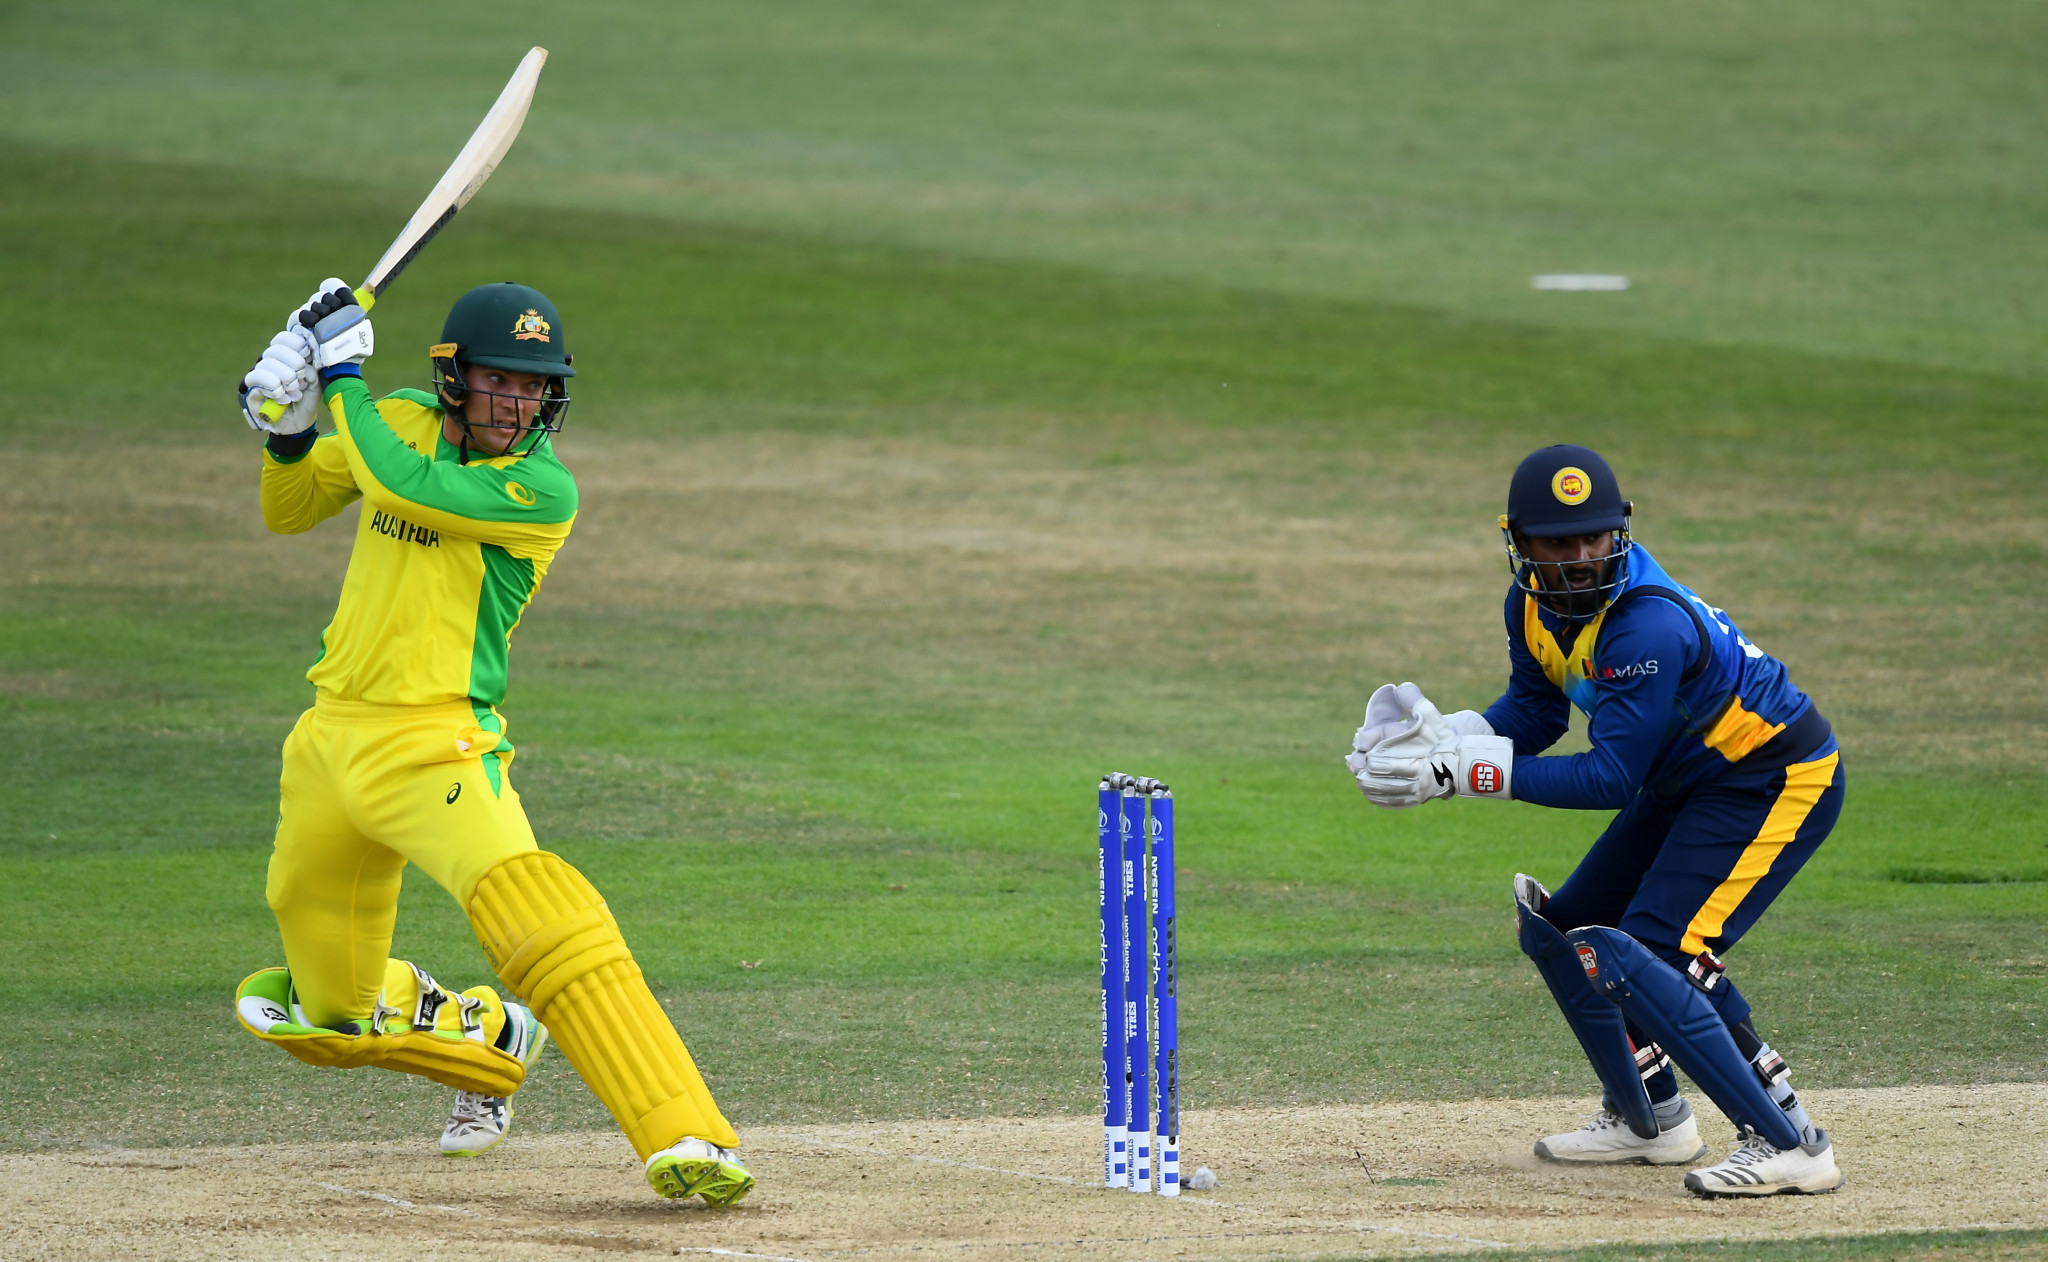 Australia beat Sri Lanka by five wickets in the other warm-up game played today ©Getty Images